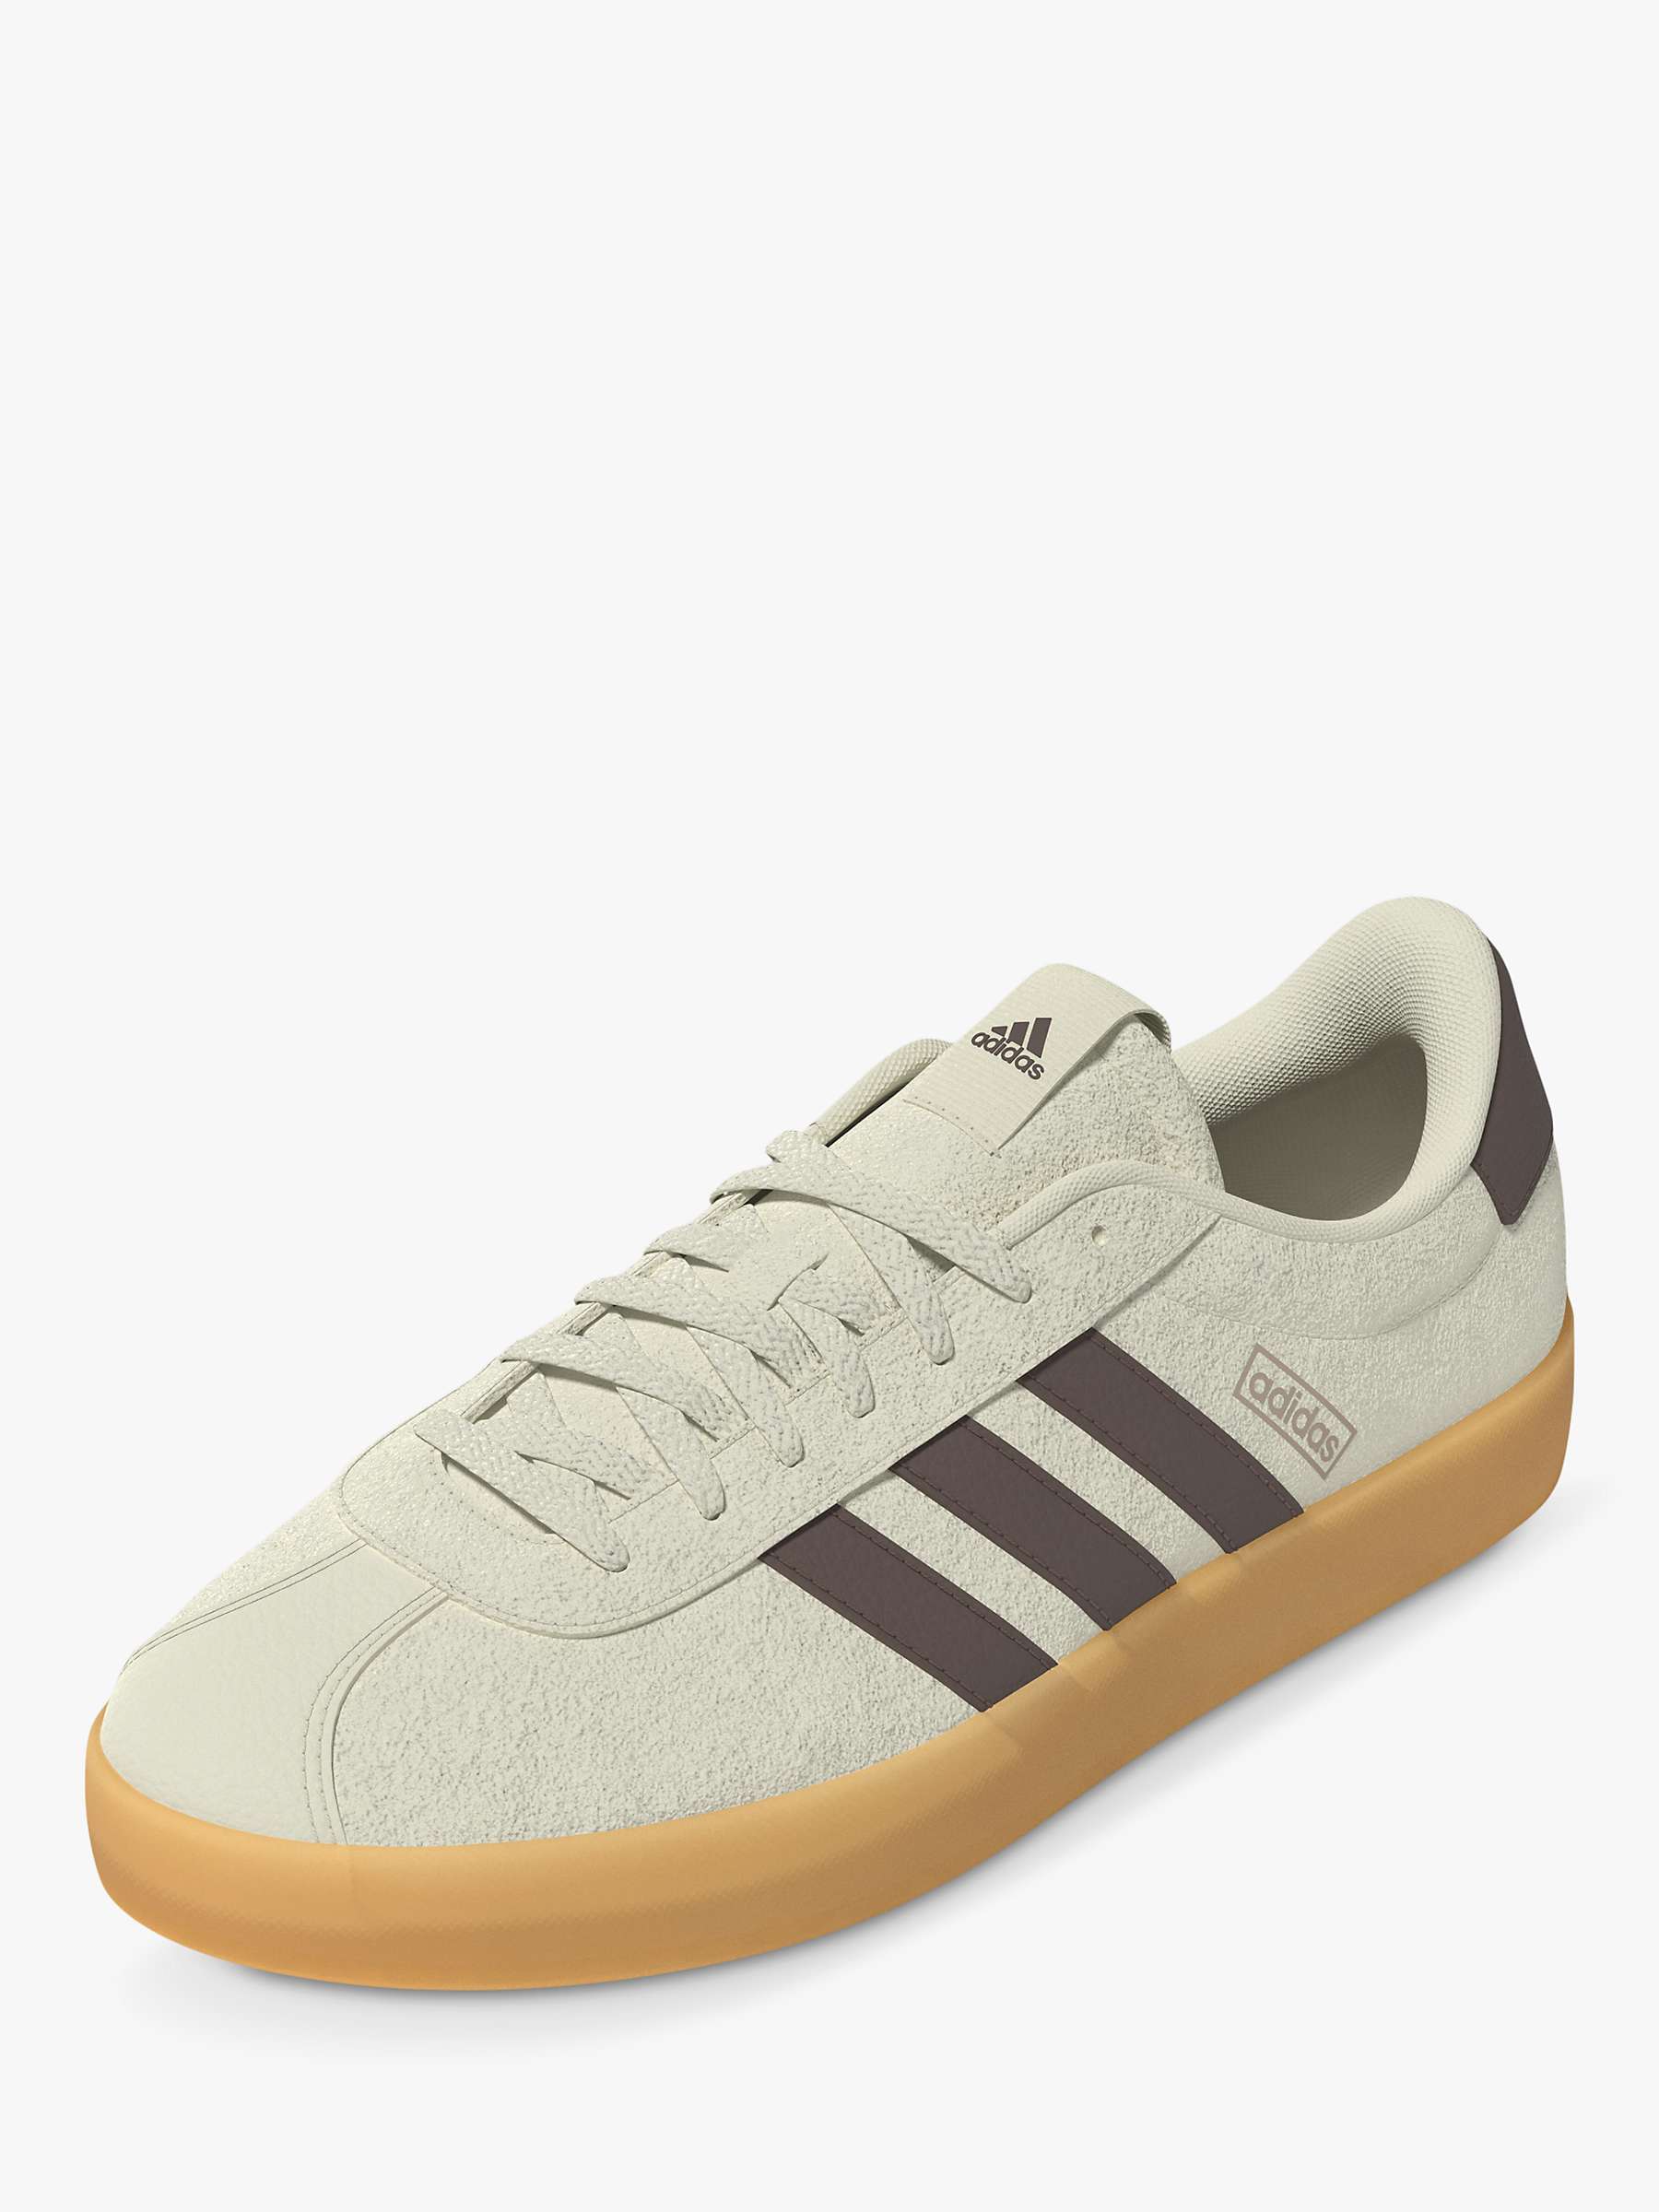 Buy adidas VL Court Trainers, White/Earth Online at johnlewis.com